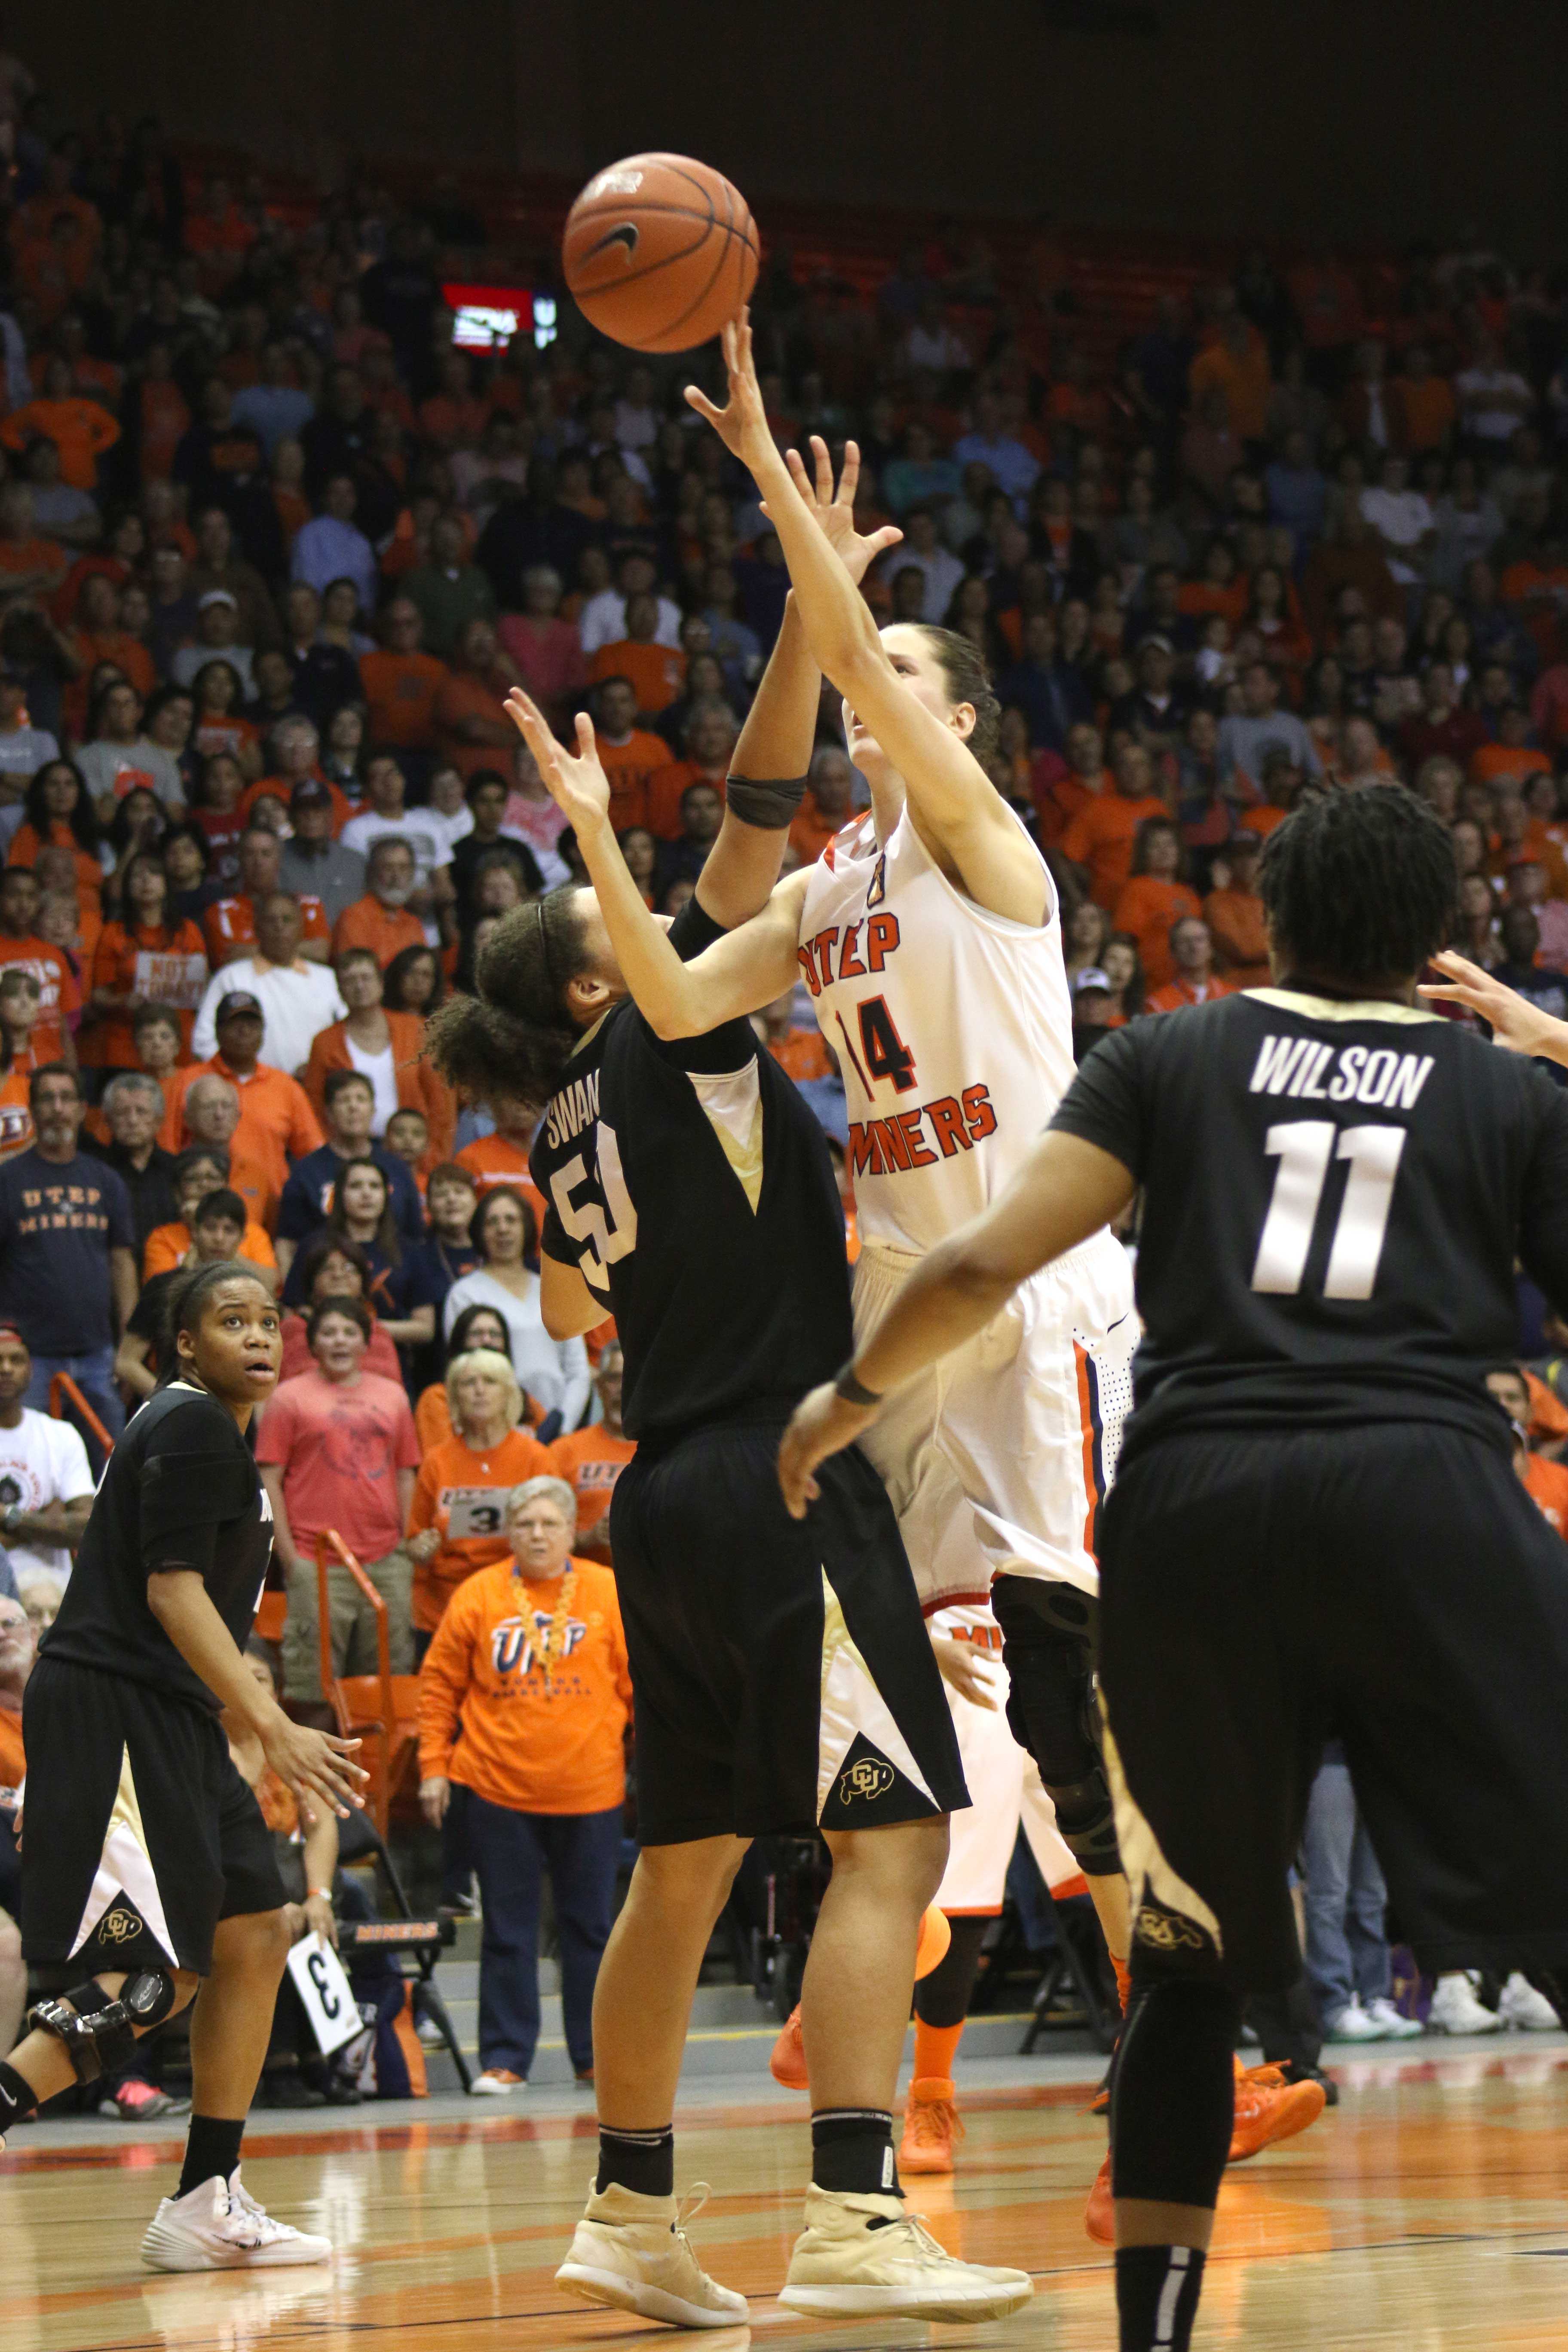 UTEP+takes+down+Colorado+68-60+to+advance+to+WNIT+quarterfinals